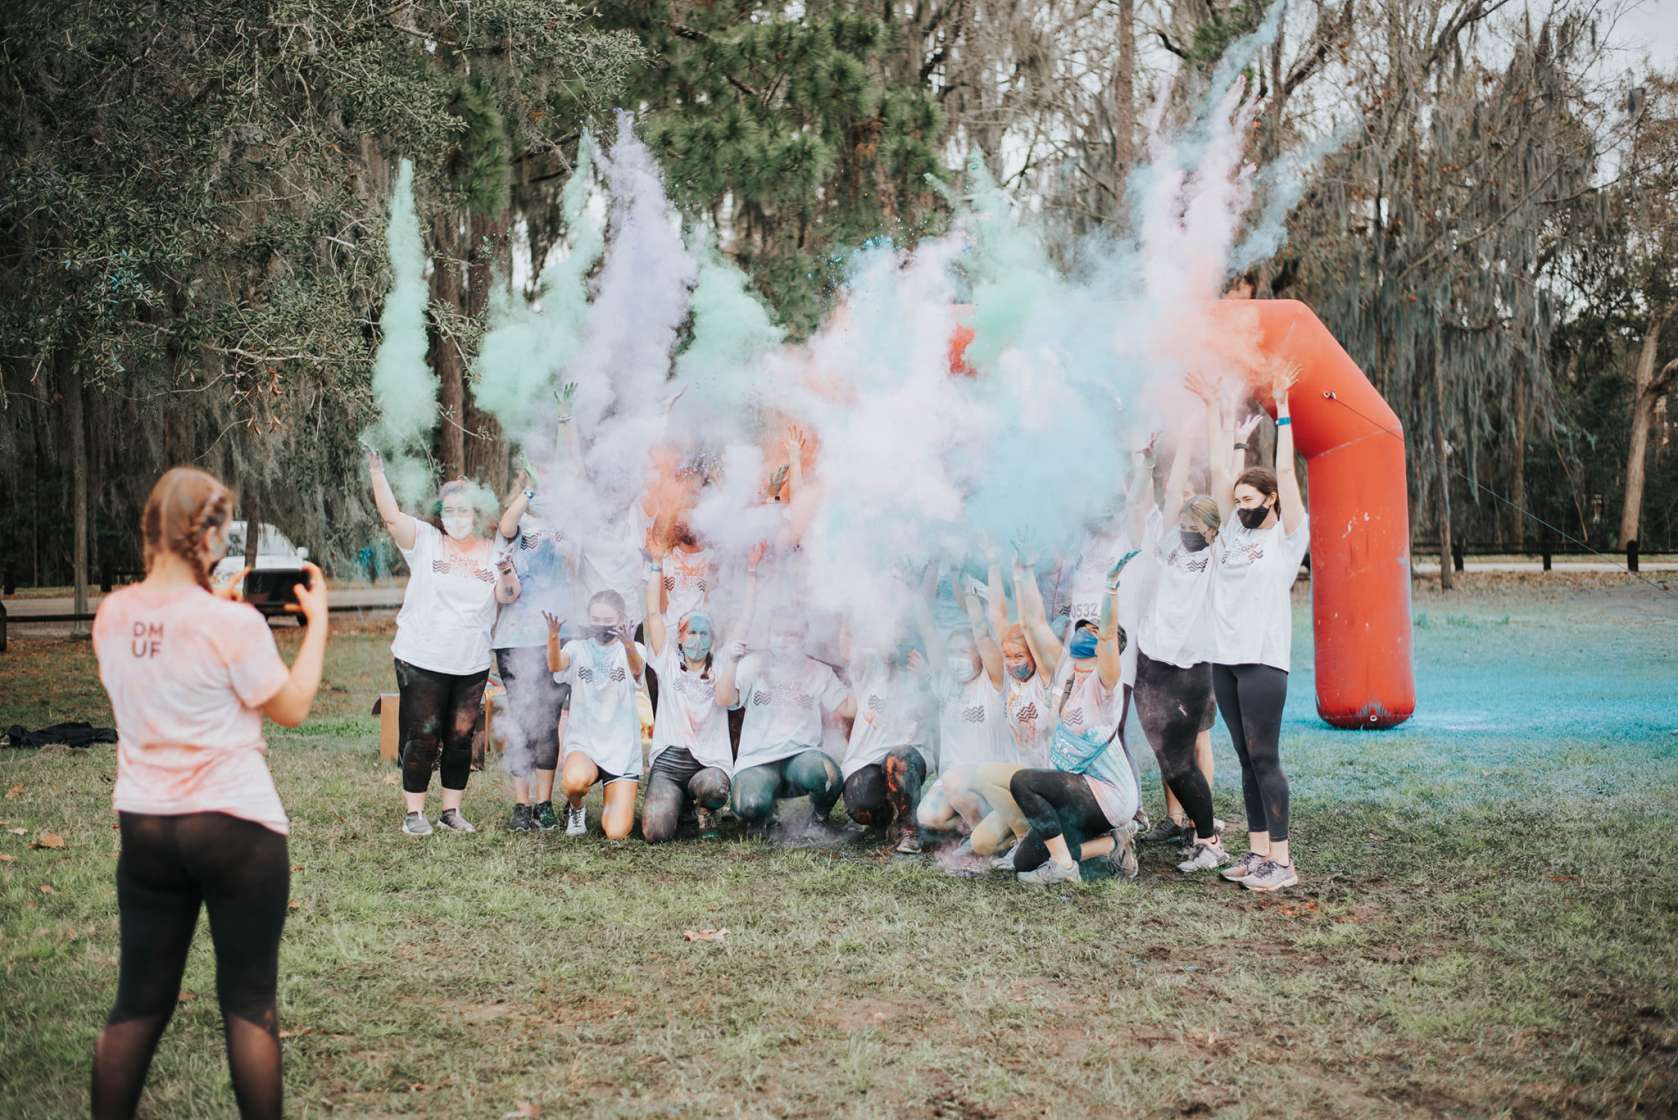 Participants throw powdered color while posing for a photo.